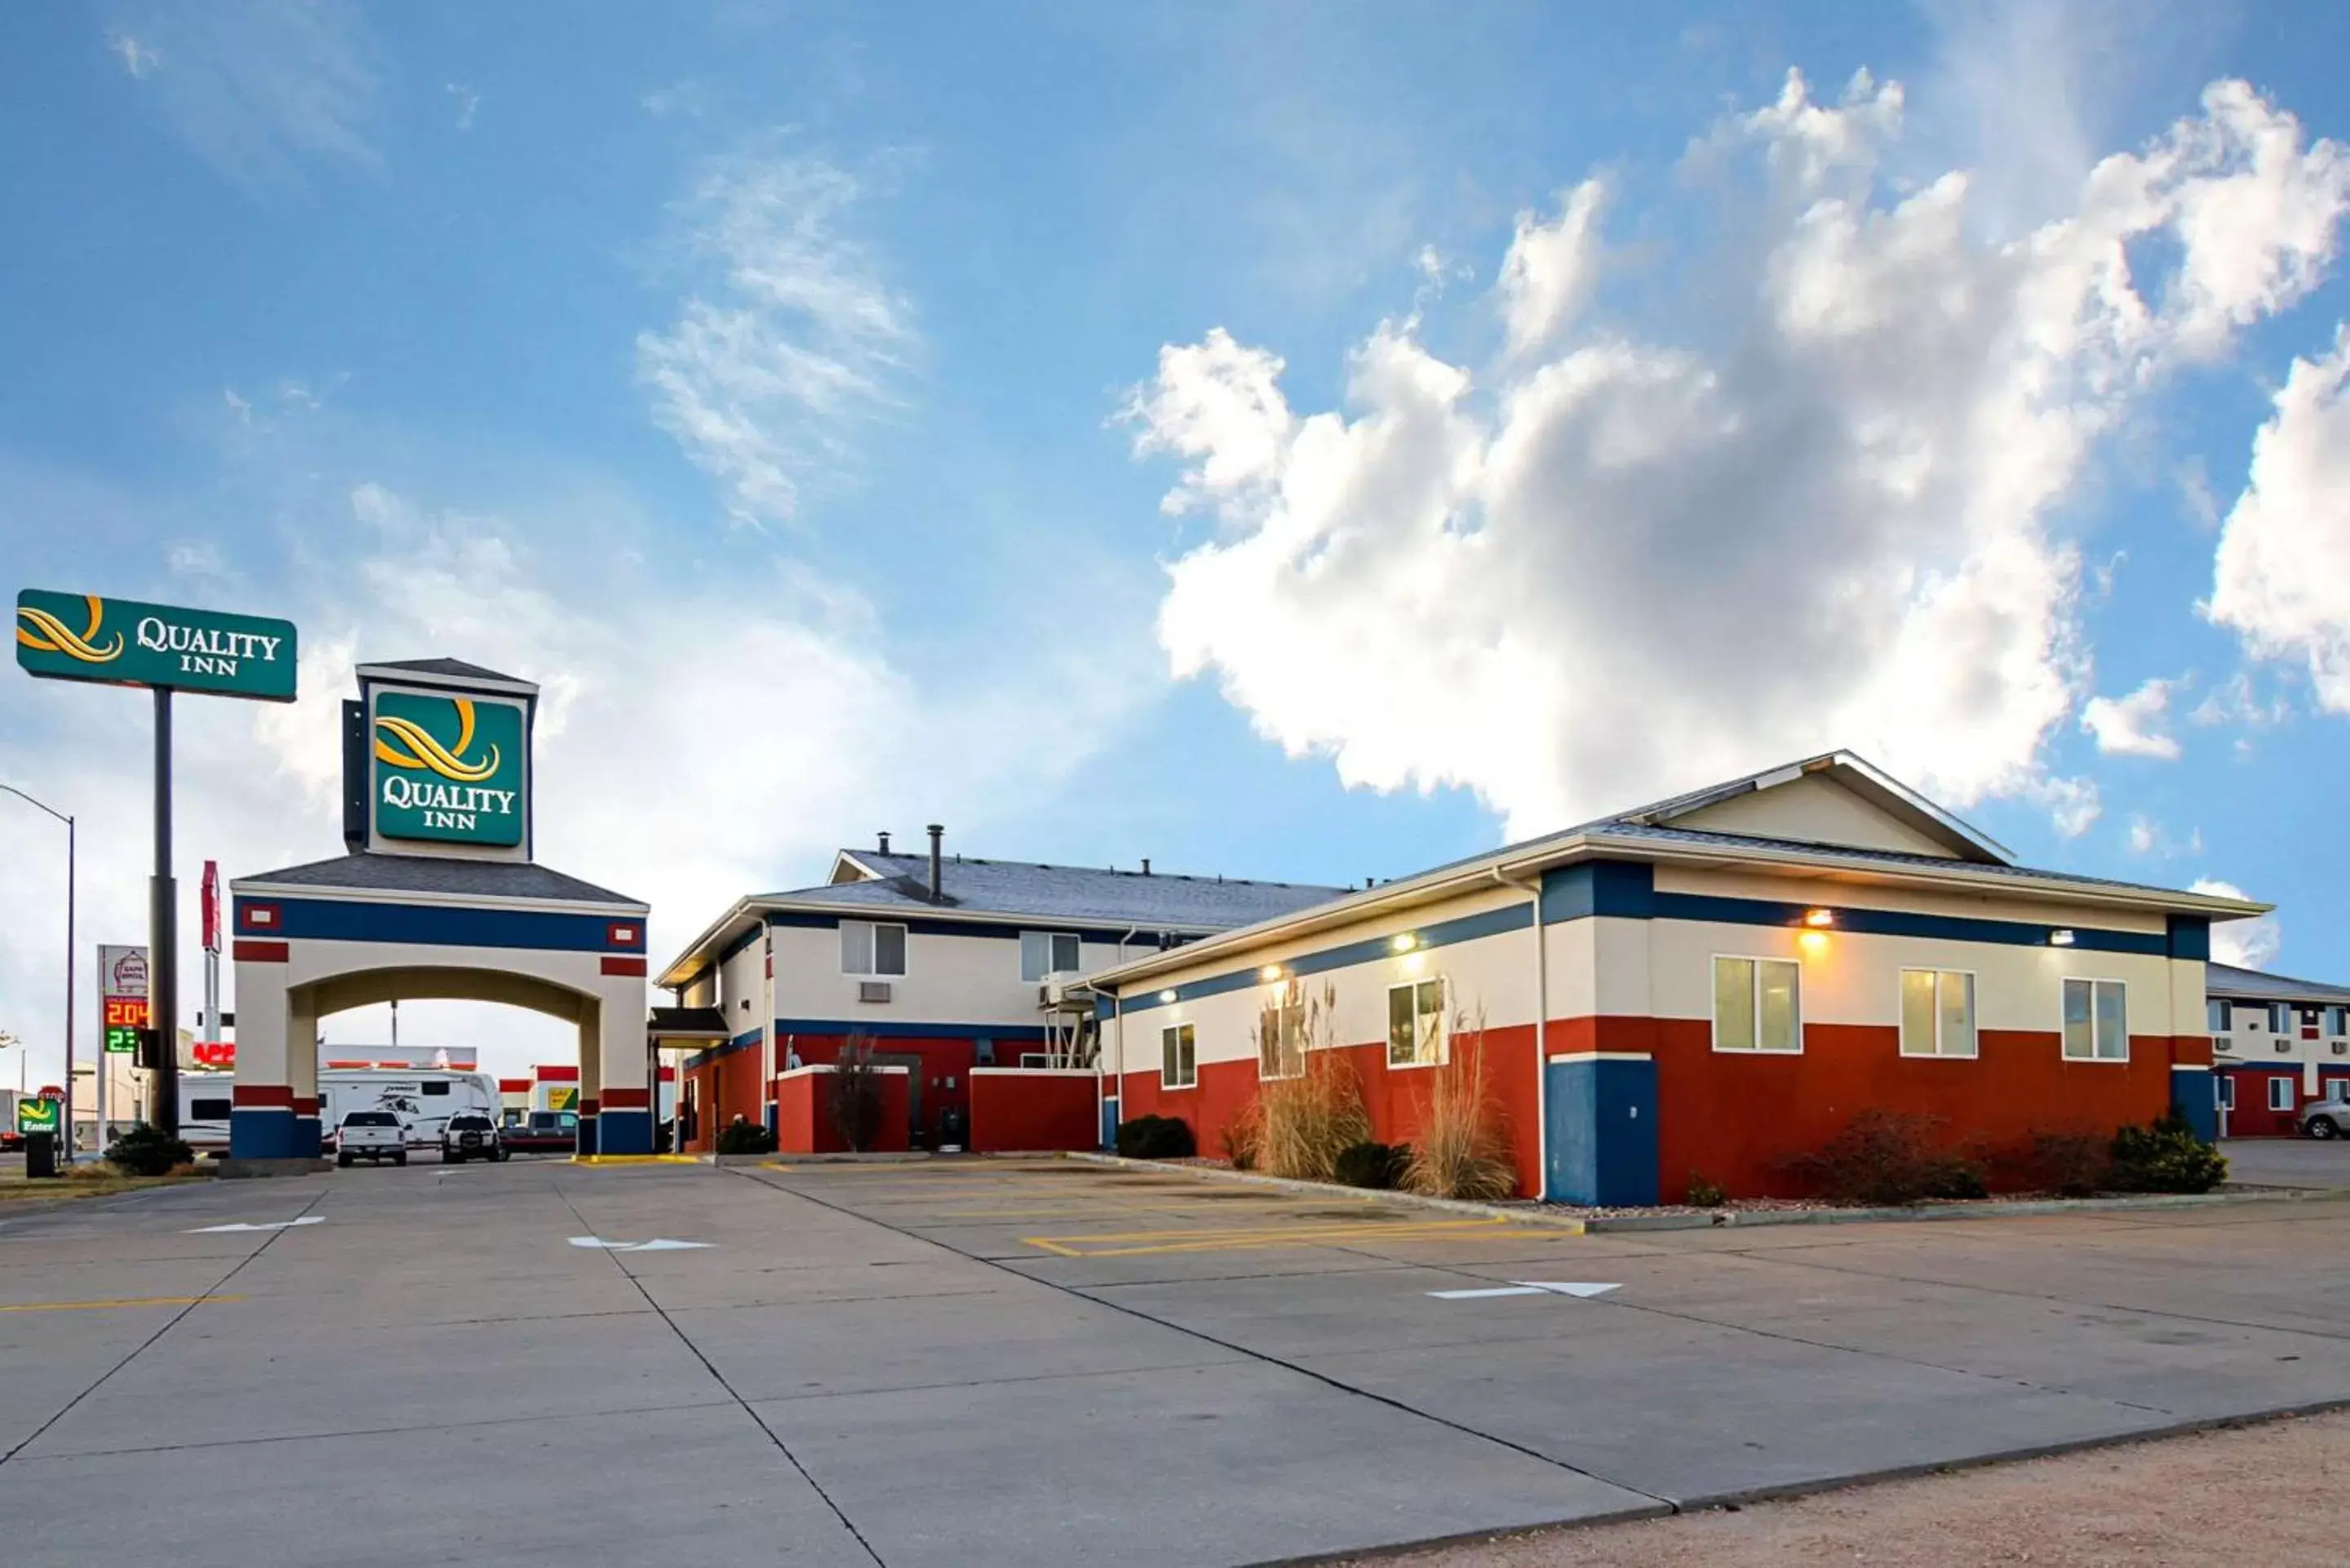 Property Building in Quality Inn Sidney I-80